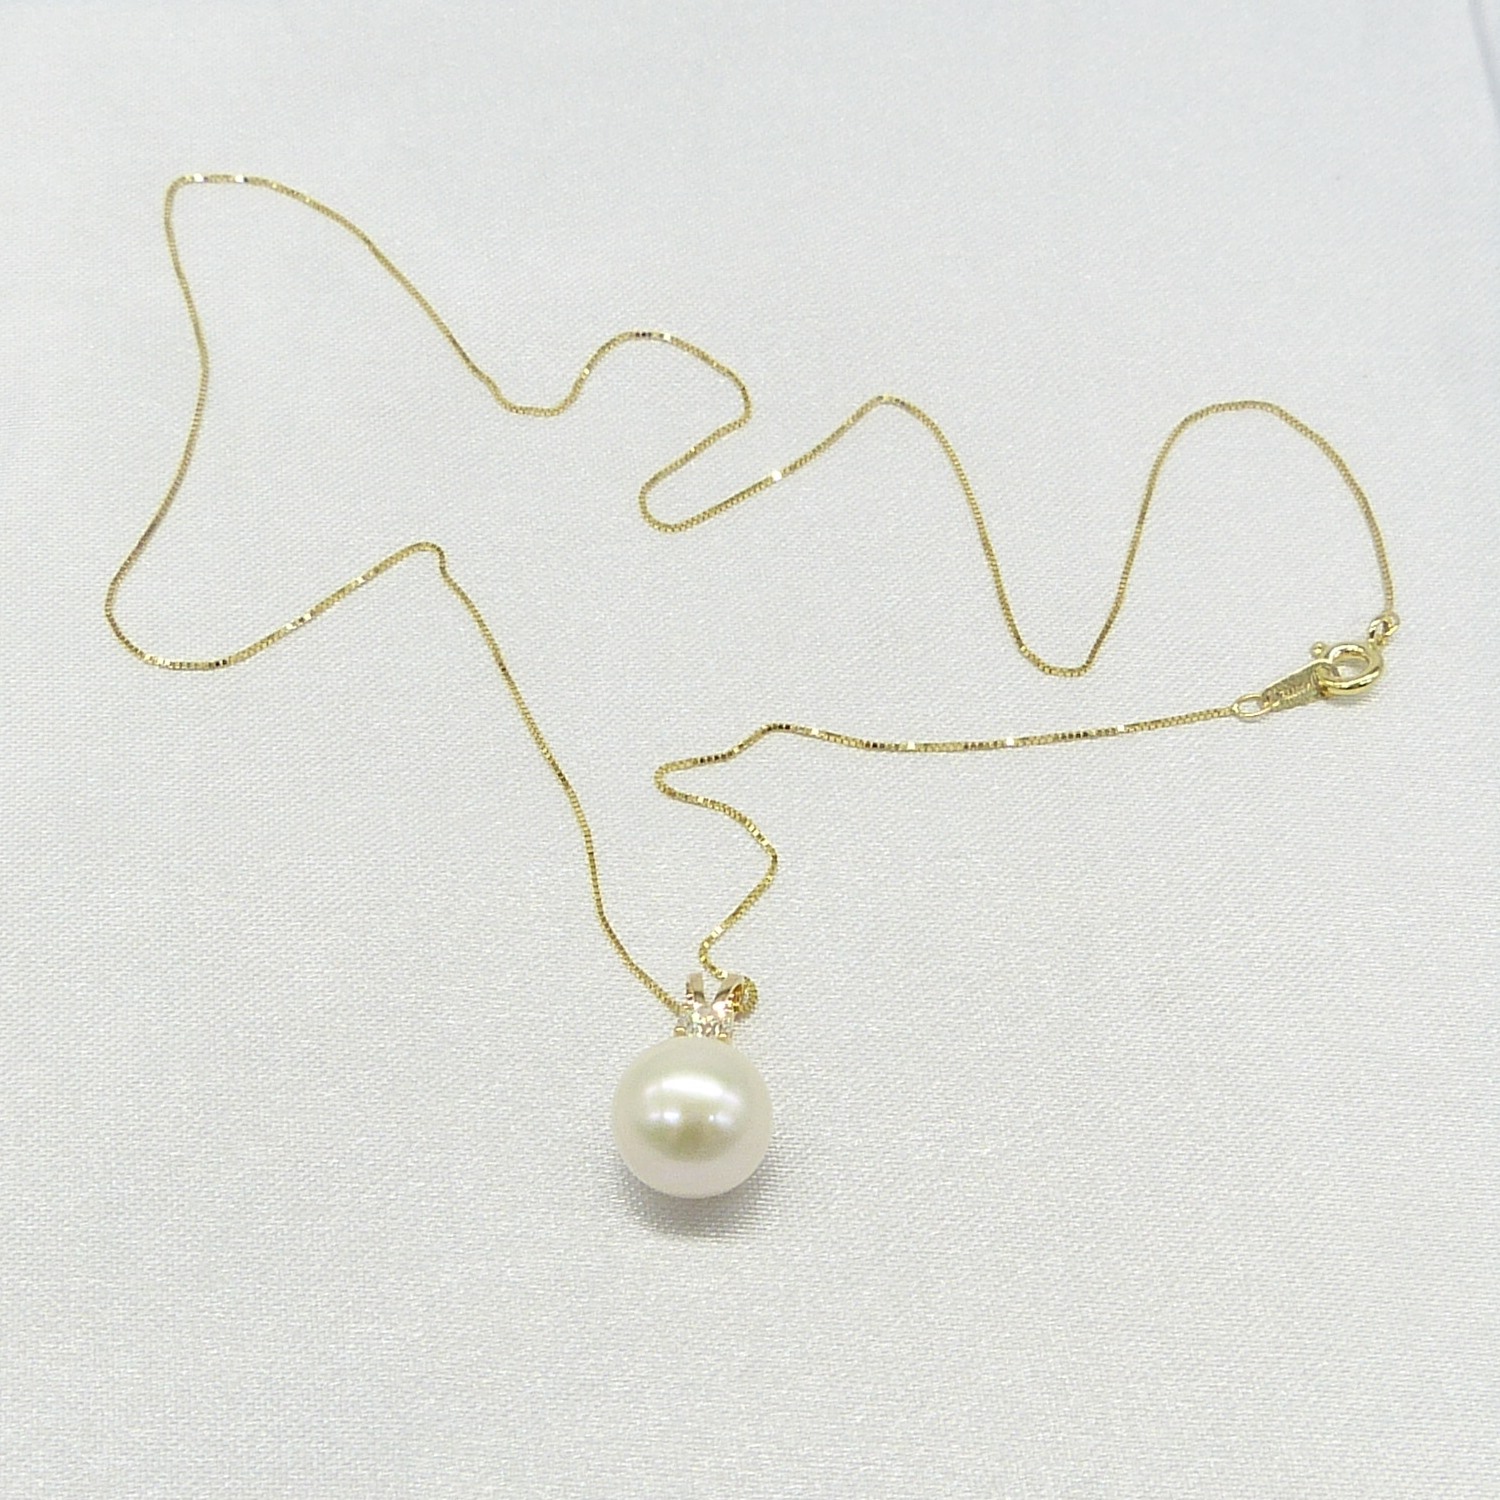 Yellow gold round freshwater pearl and 0.23 carat diamond necklace - Image 6 of 6